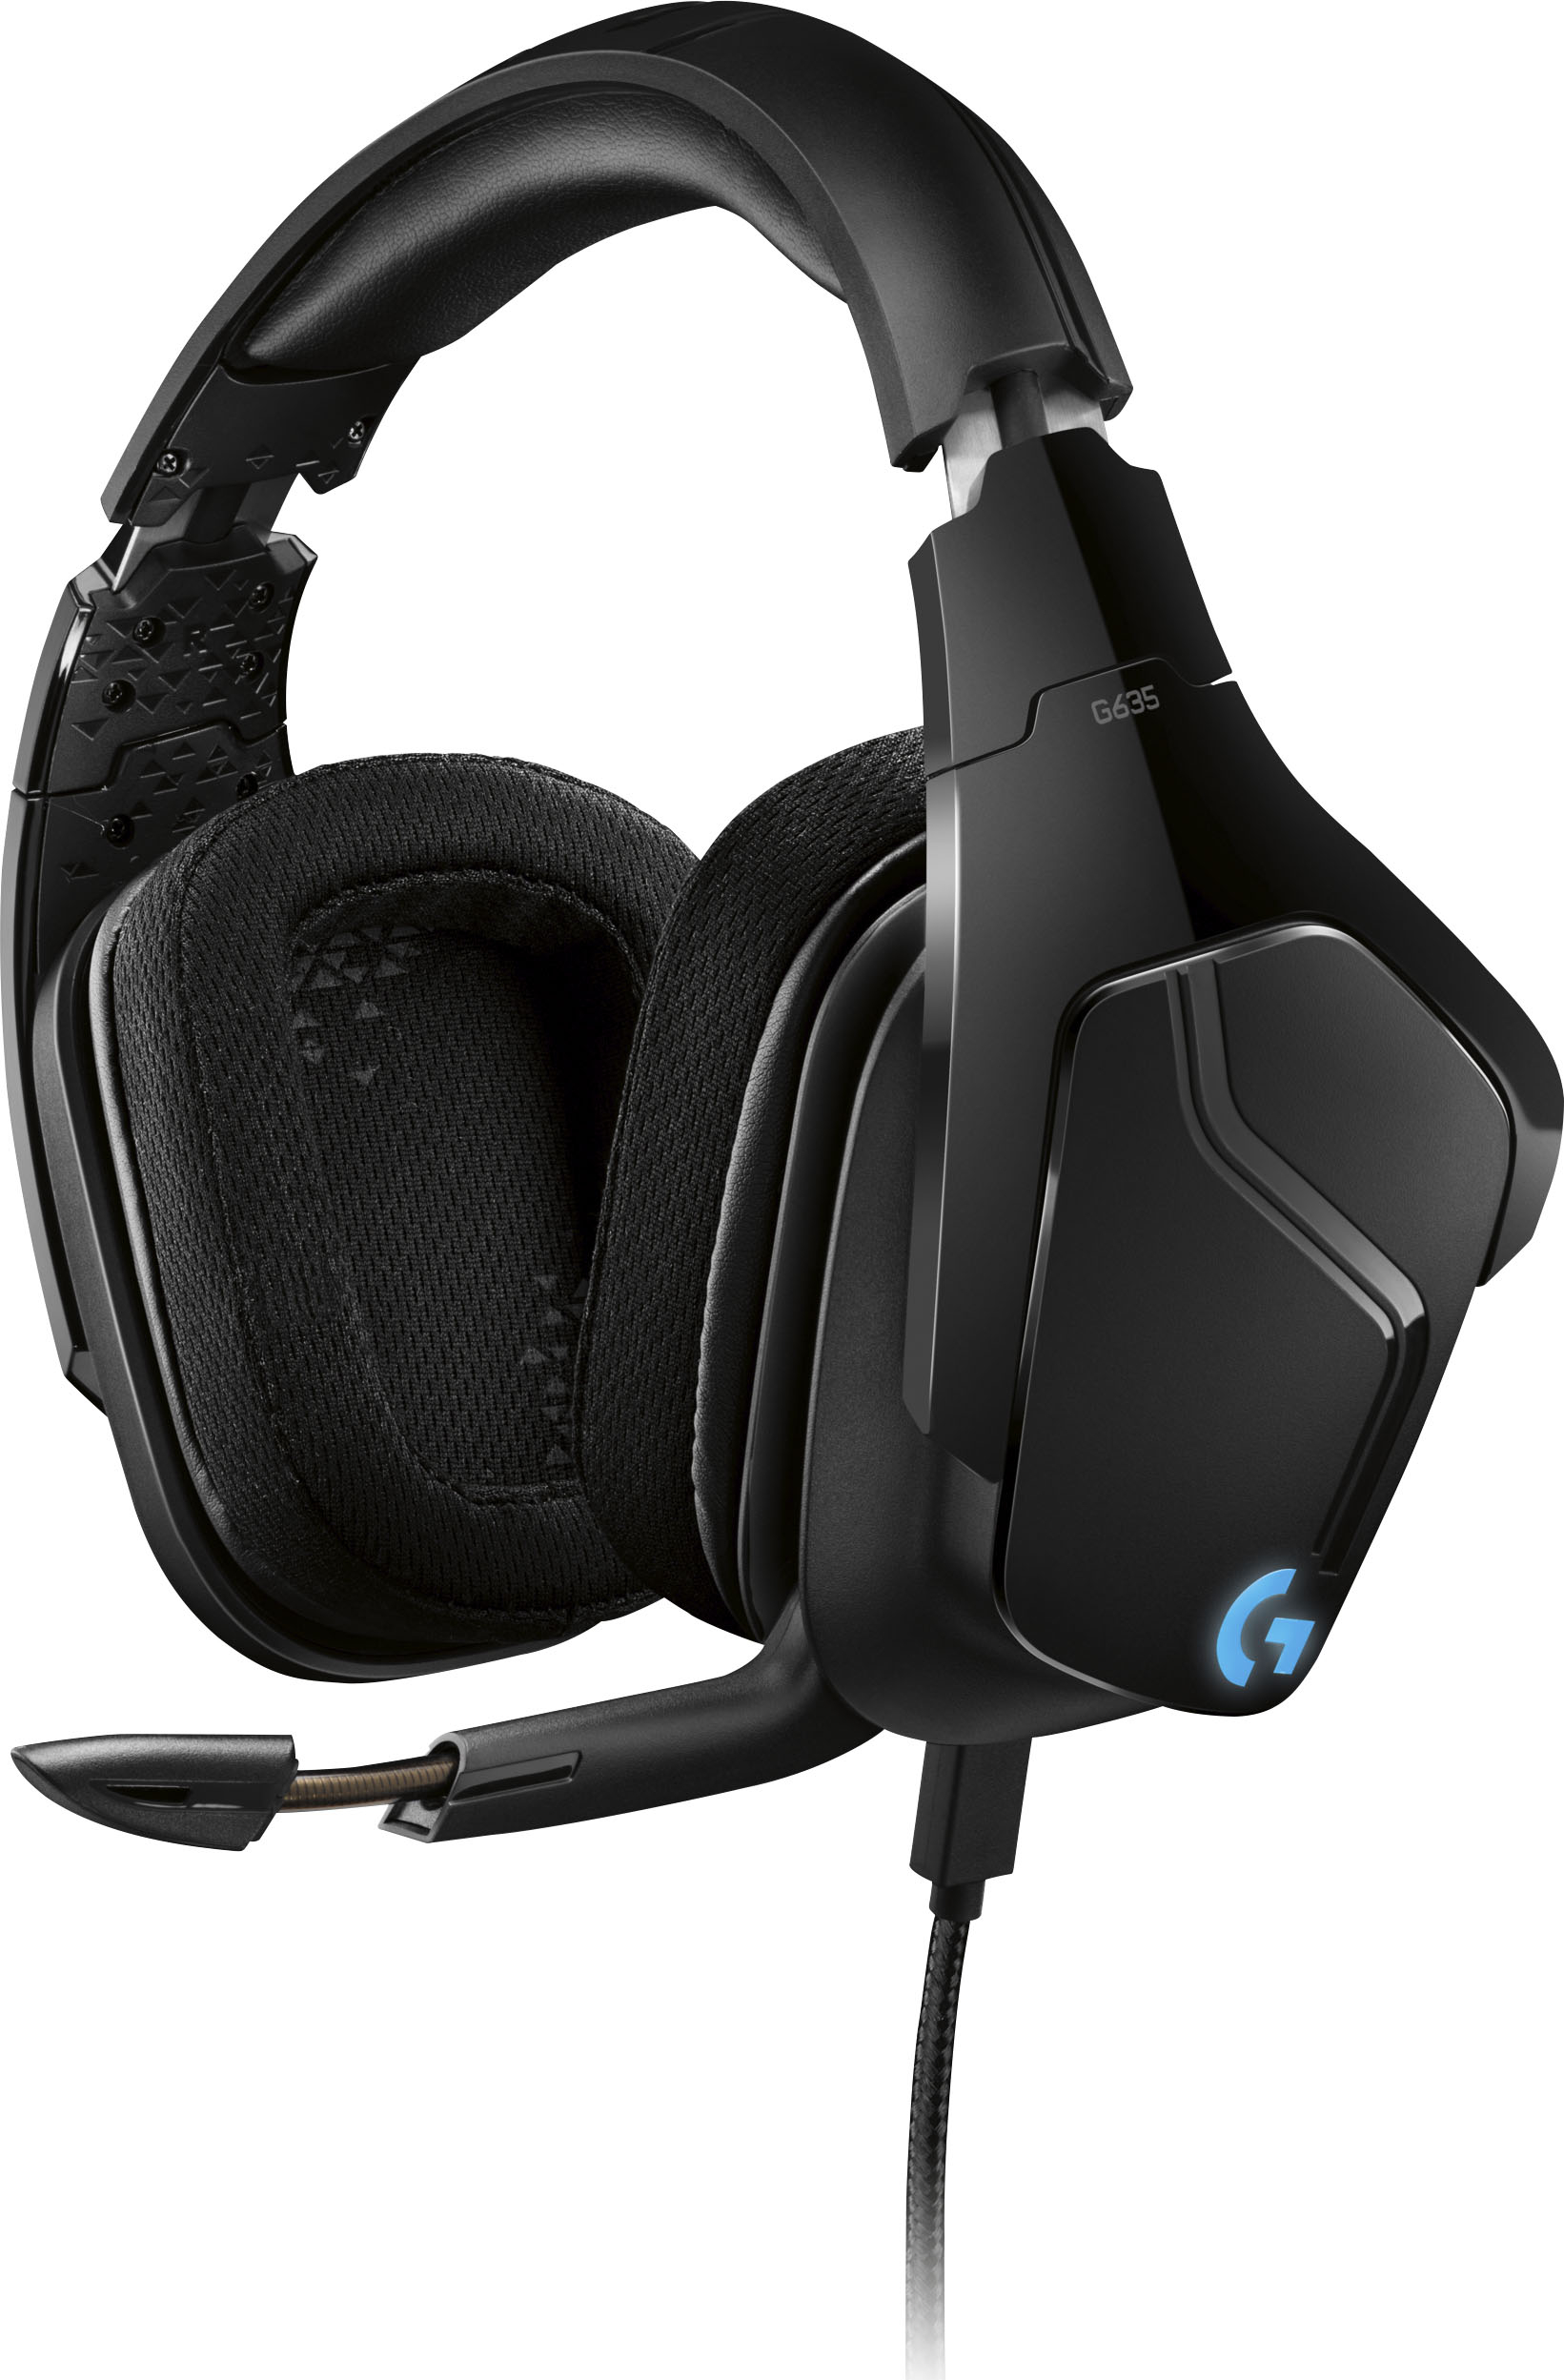 Angle View: Logitech - G635 Wired Gaming Headset for PC - Black/Blue